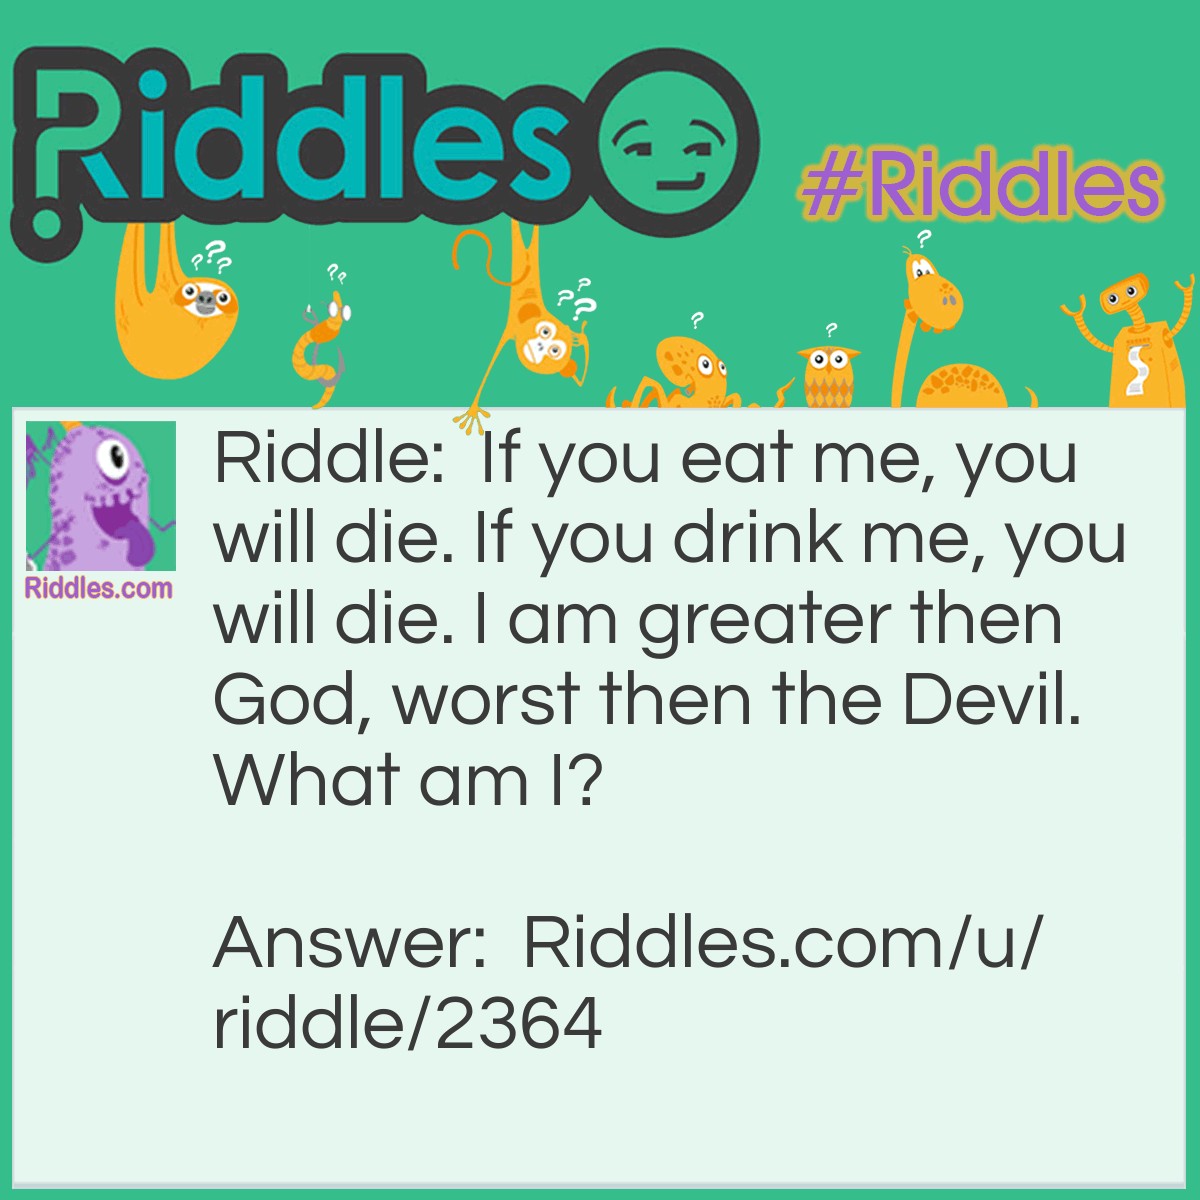 Riddle: If you eat me, you will die. If you drink me, you will die. I am greater than God, worst than the Devil. What am I? Answer: Nothing. If you eat nothing, you will die. If you drink nothing, you will die. Nothing is greater then God. Nothing is worst then the Devil.